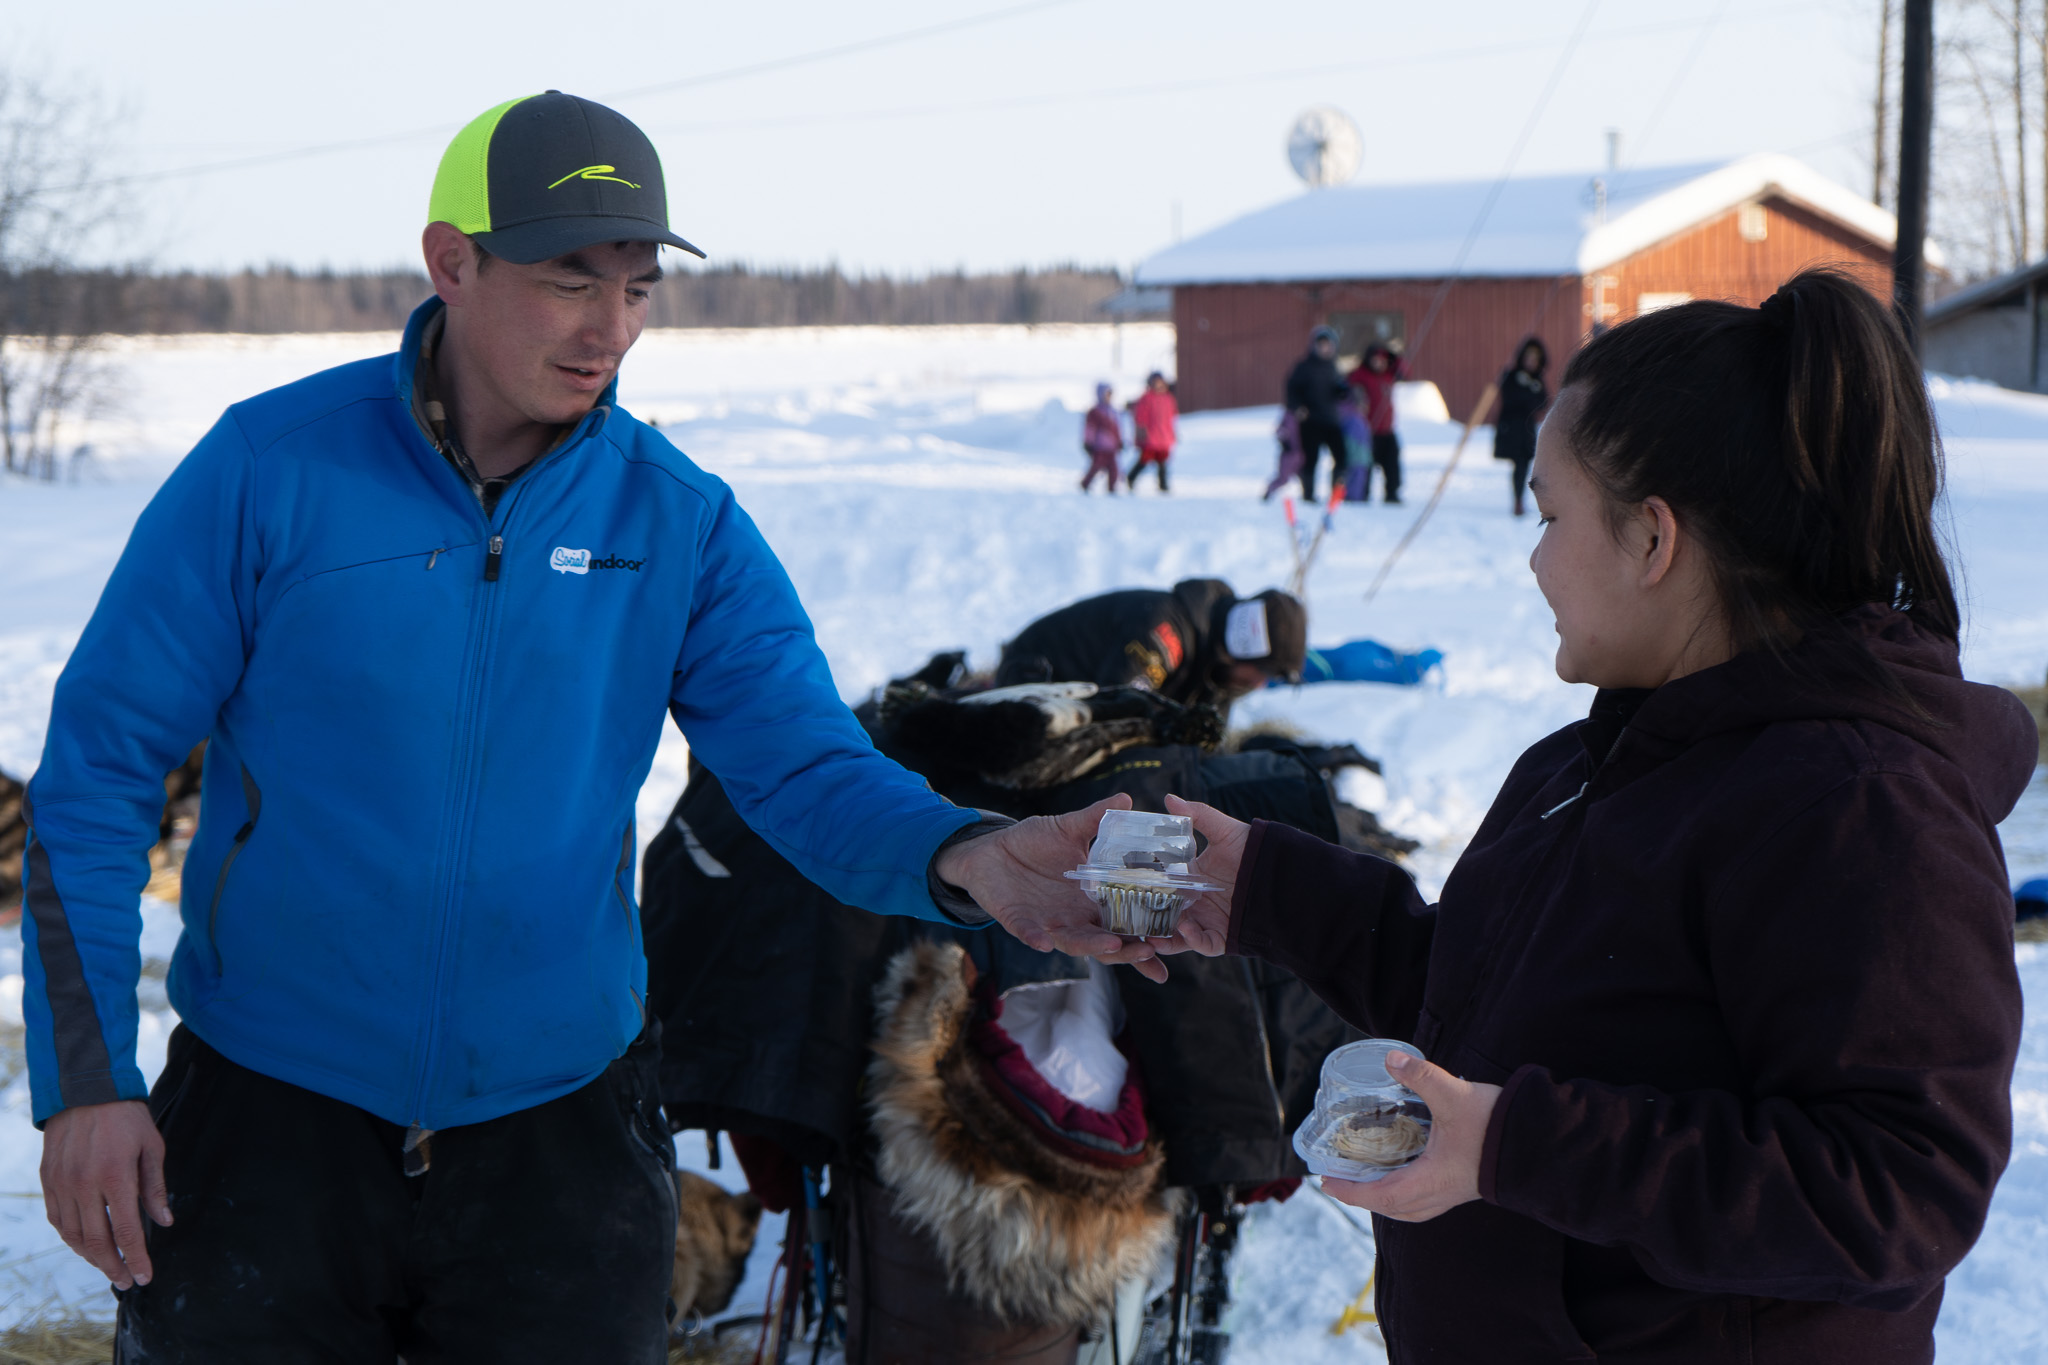 A person passes a plastic cupcake to a musher in a baseball hat